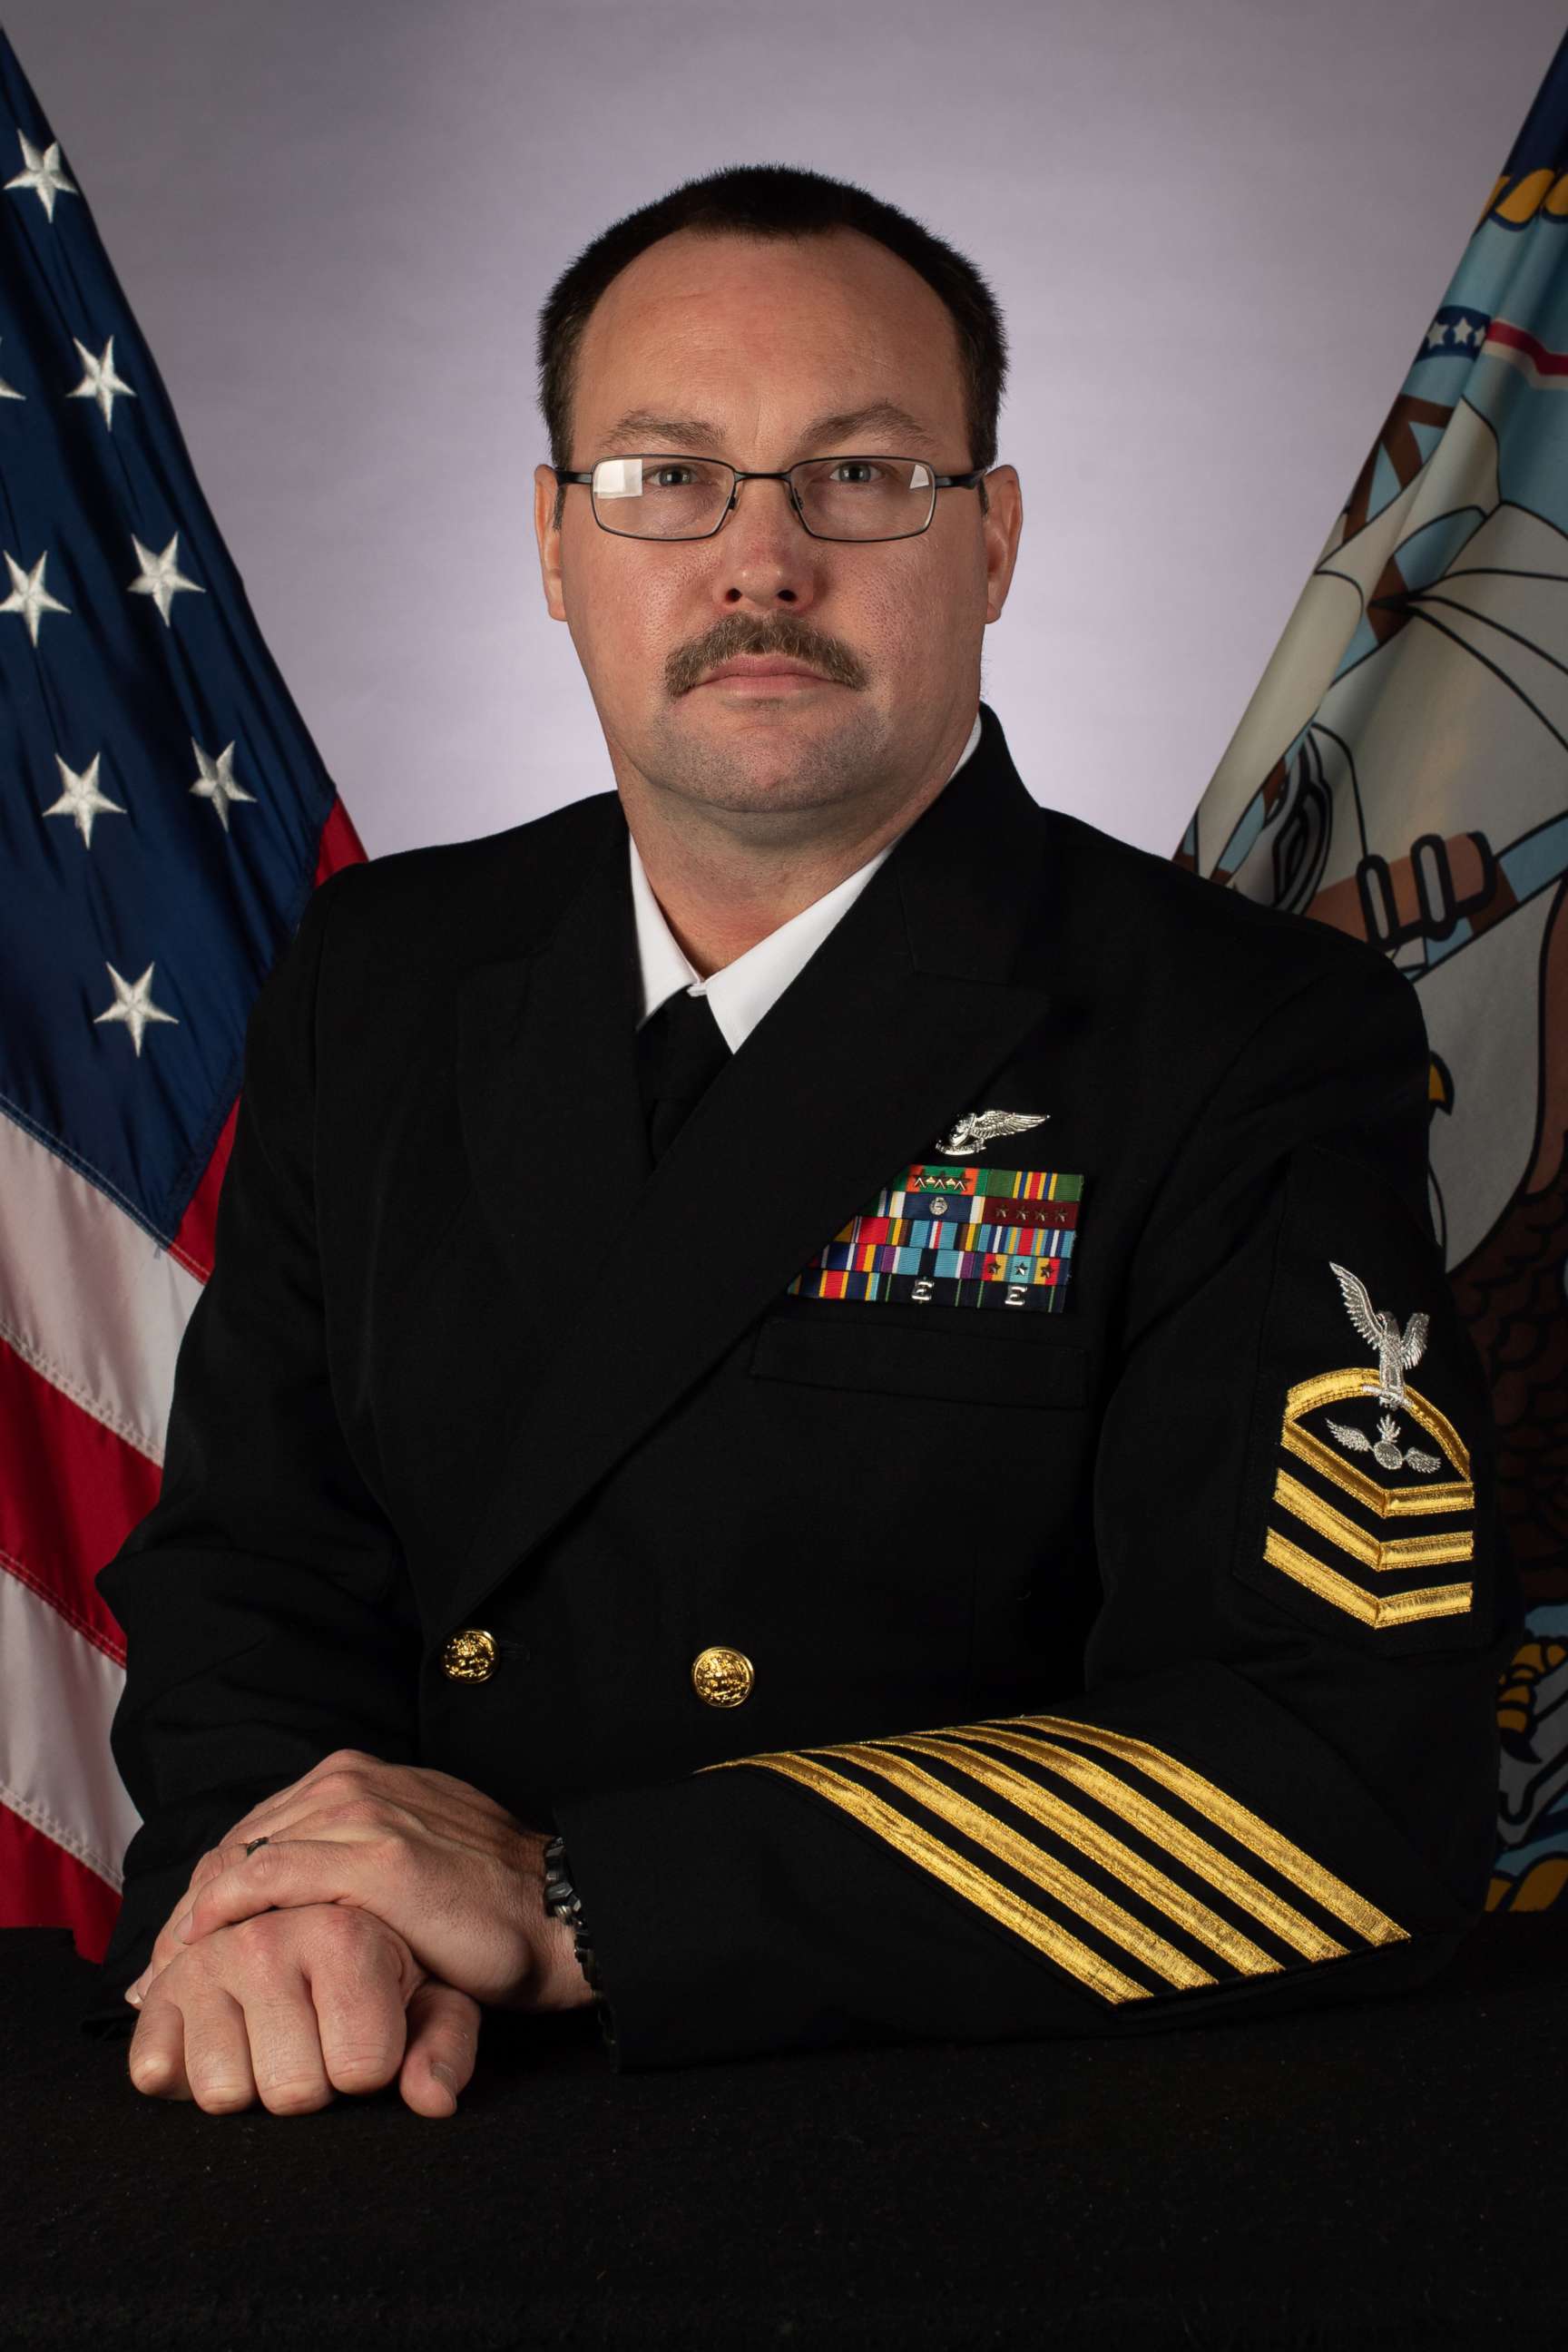 PHOTO: Aviation Ordnanceman Chief Petty Officer Charles Robert Thacker Jr., 41, of Fort Smith, Ark., is pictured in a photo released by the U.S. Navy. He was assigned to the USS Theodore Roosevelt and died from COVID-19 on April 13, 2020.